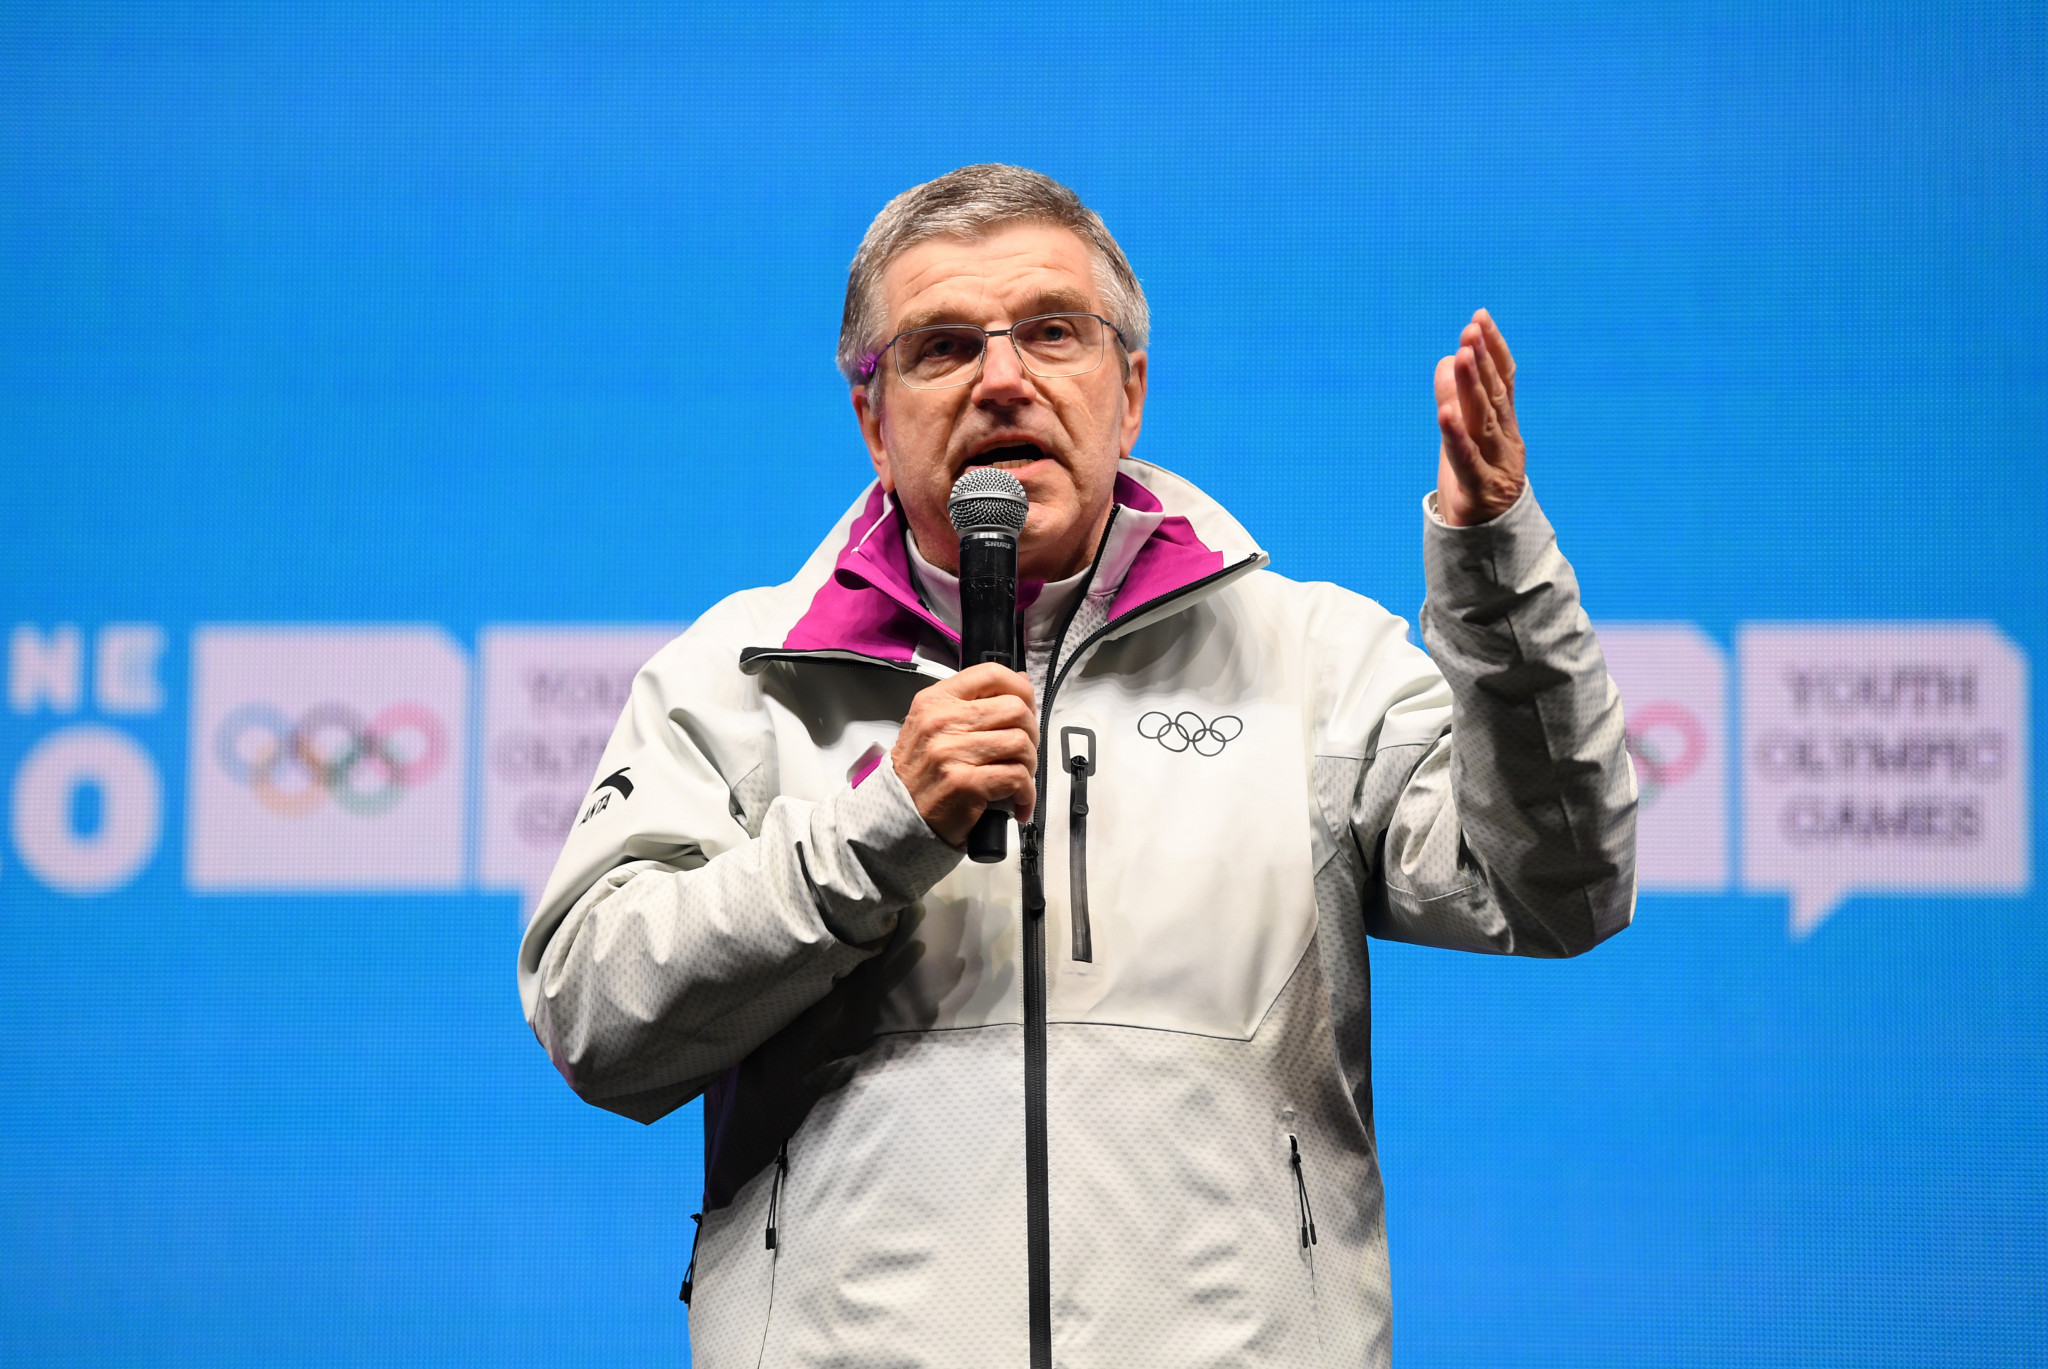 IOC President Thomas Bach issued warnings to athletes thinking of staging a podium protest at the Tokyo 2020 earlier this year ©Getty Images